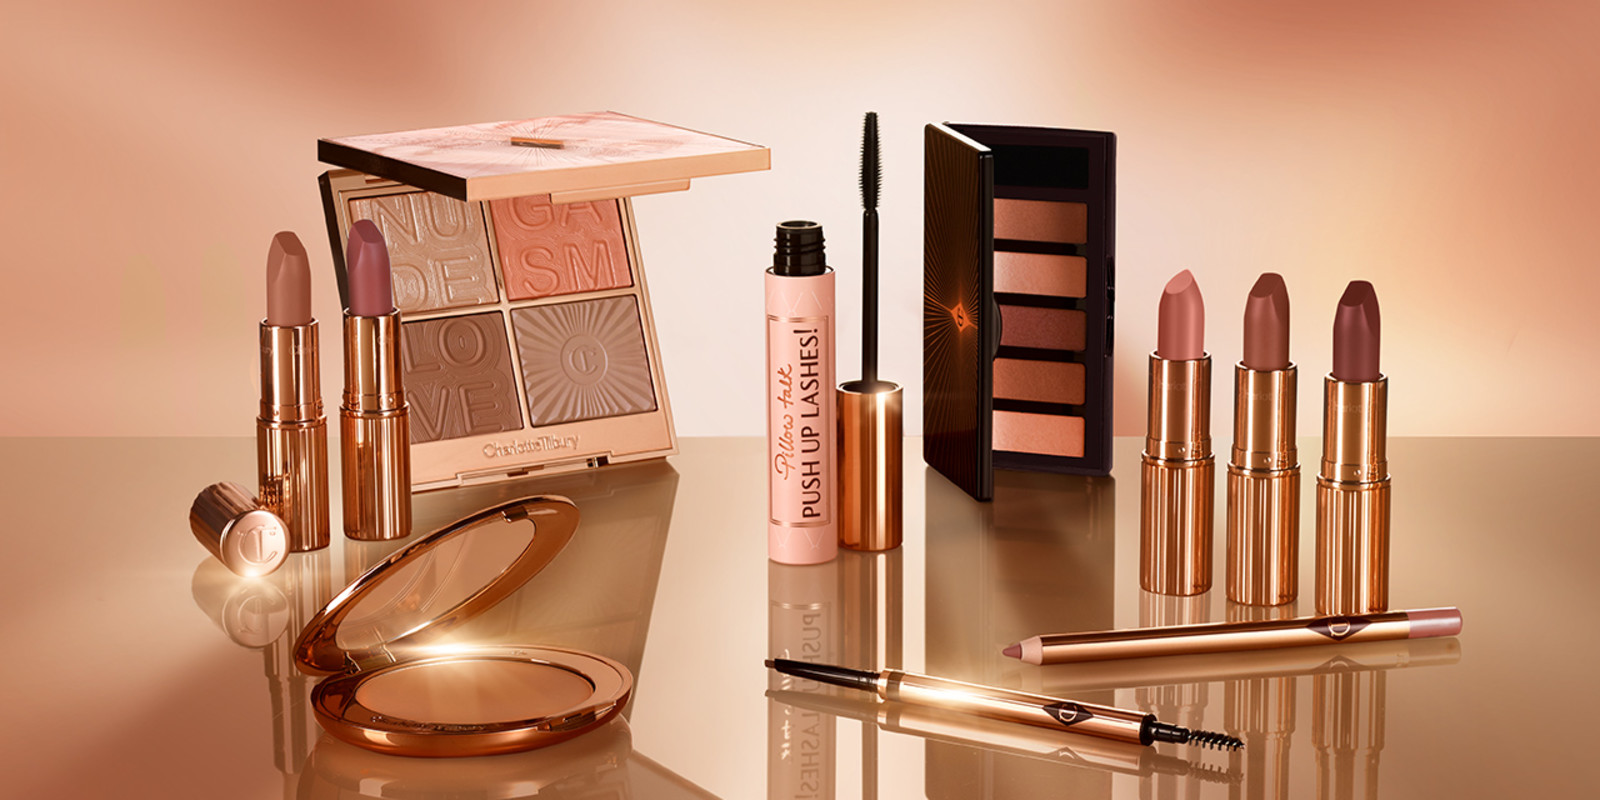 A collection of five open lipsticks in nude shades of pink, brown, and red, black mascara in a pink-coloured tube with a gold-coloured lid, face palette with glowy blush, highlighter, eyeshadow, and contour powders, bronzer compact, lip liner in a taupe shade, and double-ended eyebrow pencil.